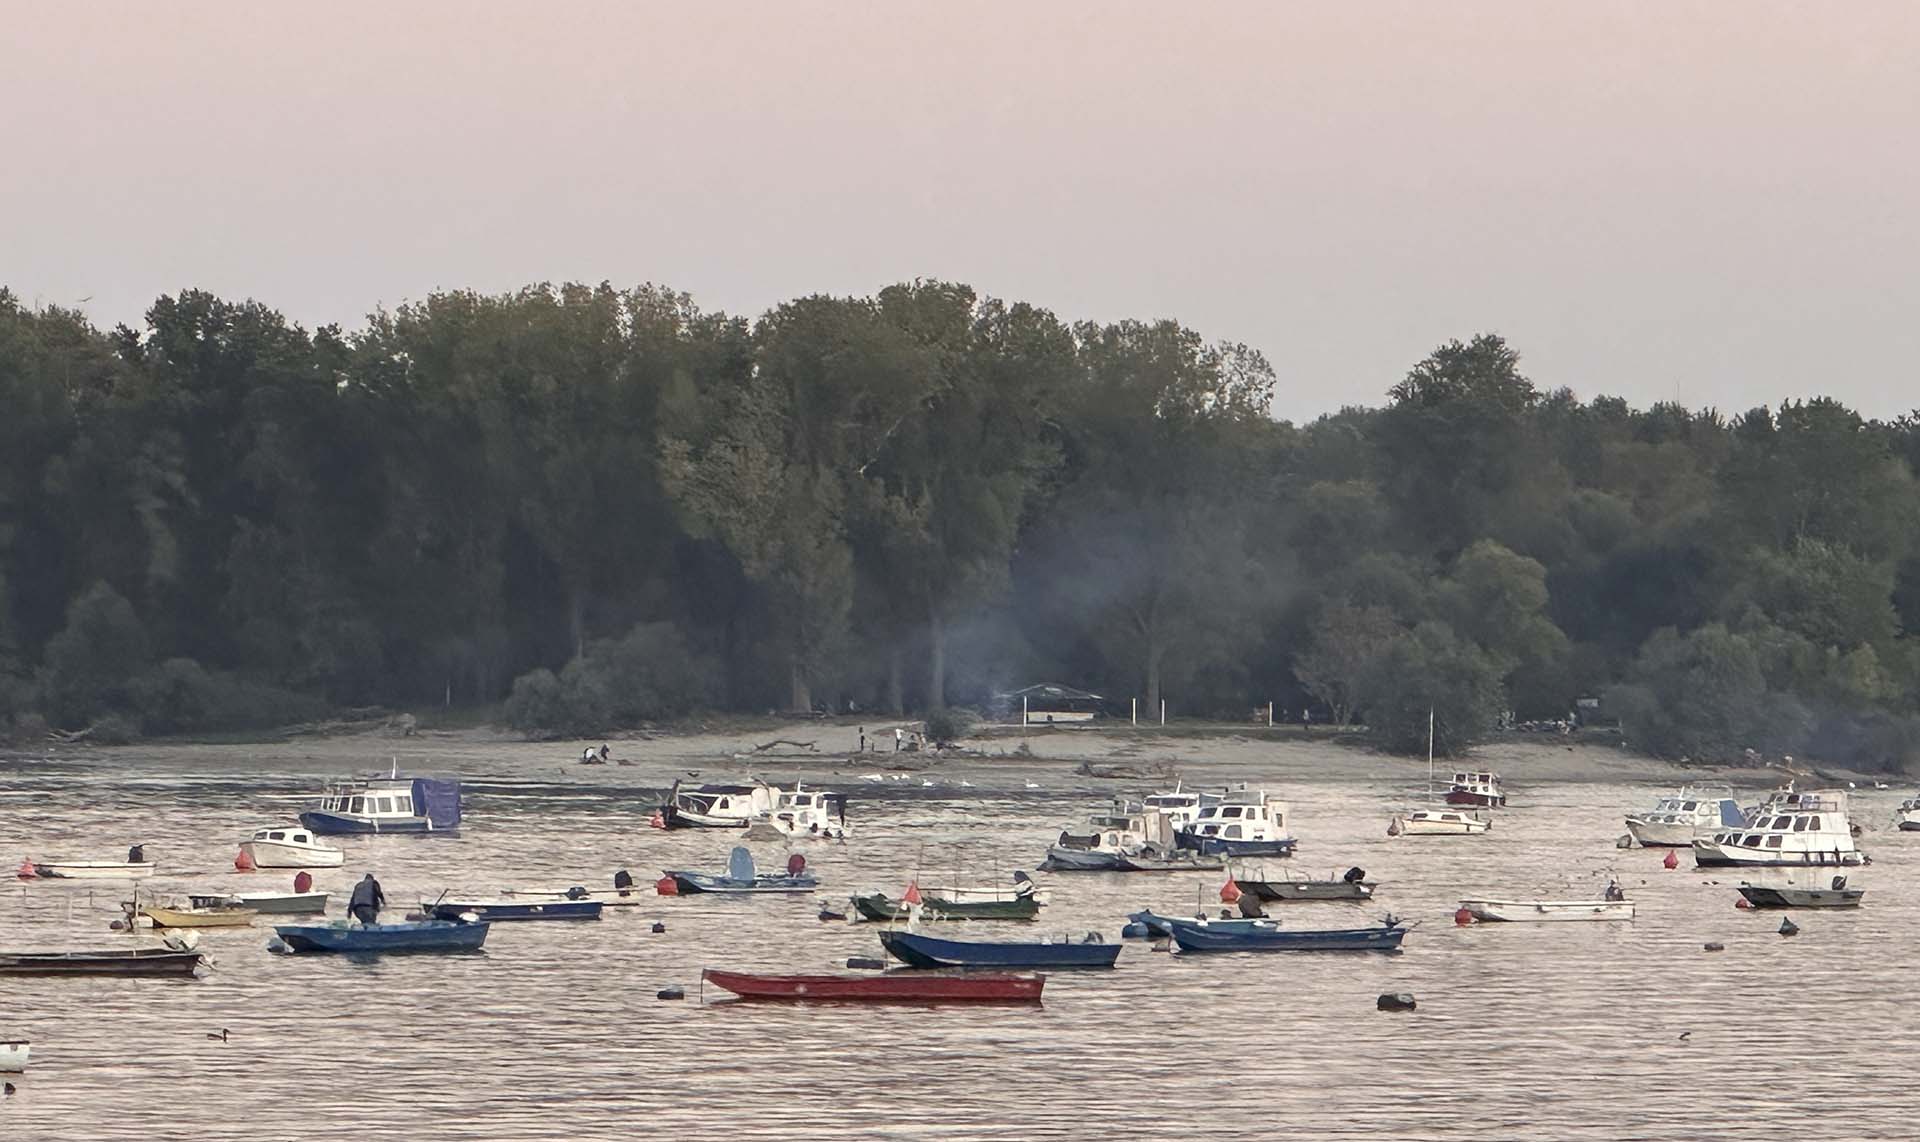 Many boats on the Danube River